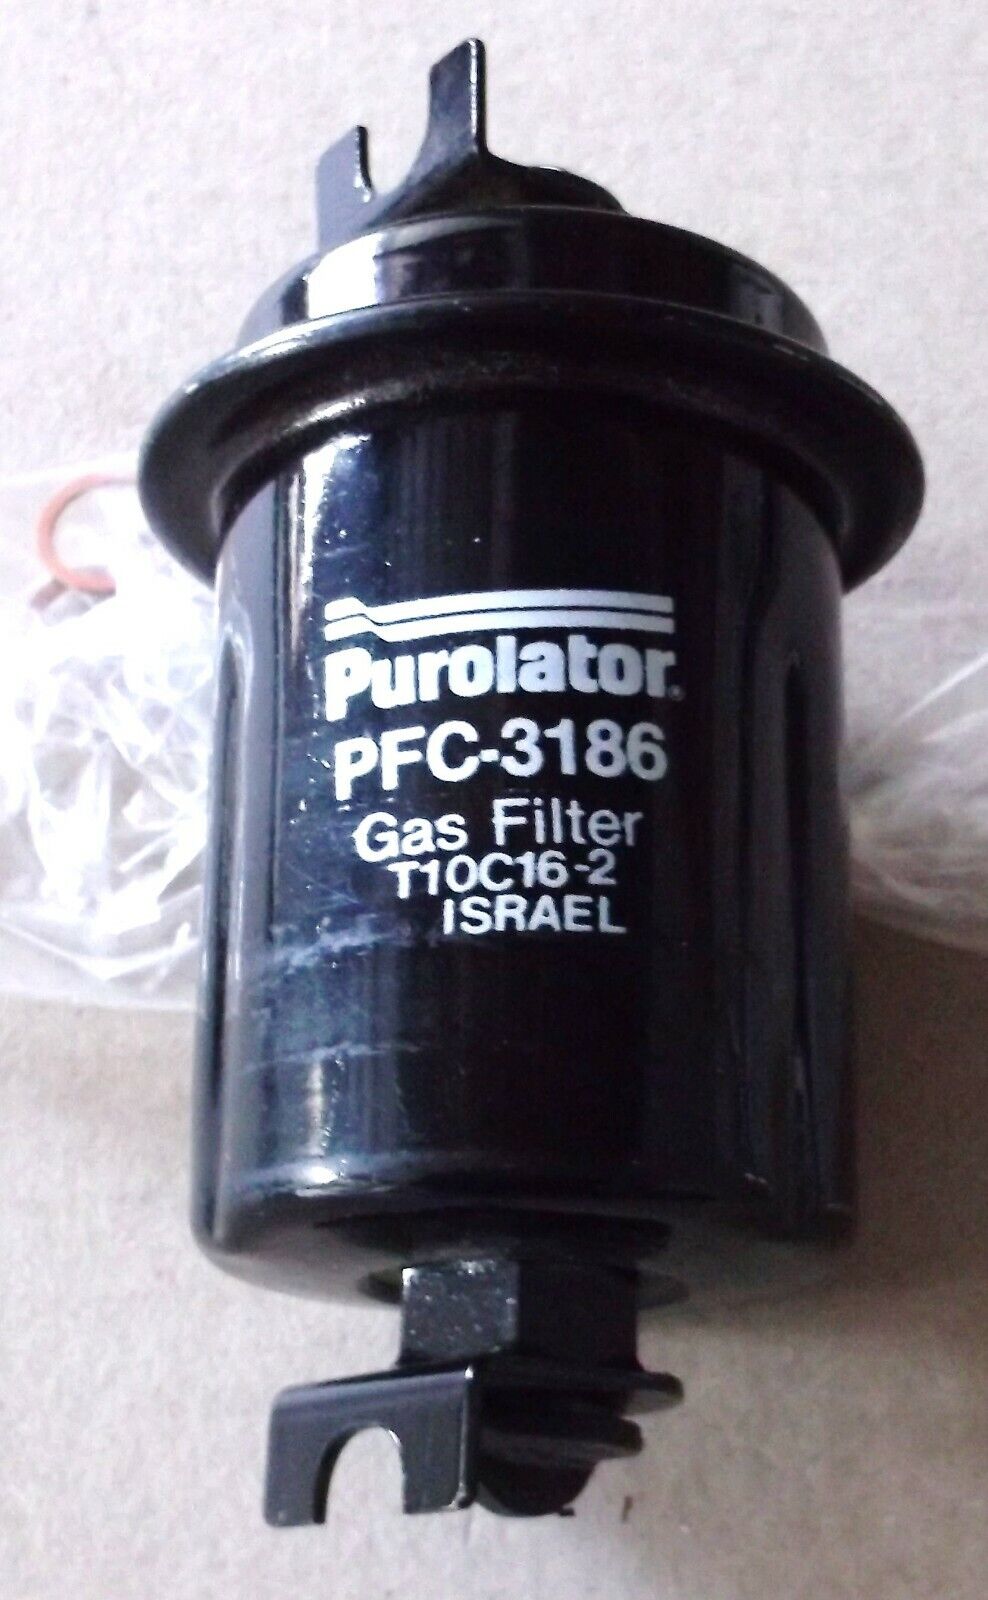 1 Purolator F 43186 filter ( AT A GREAT PRICE, SAVE NOW)